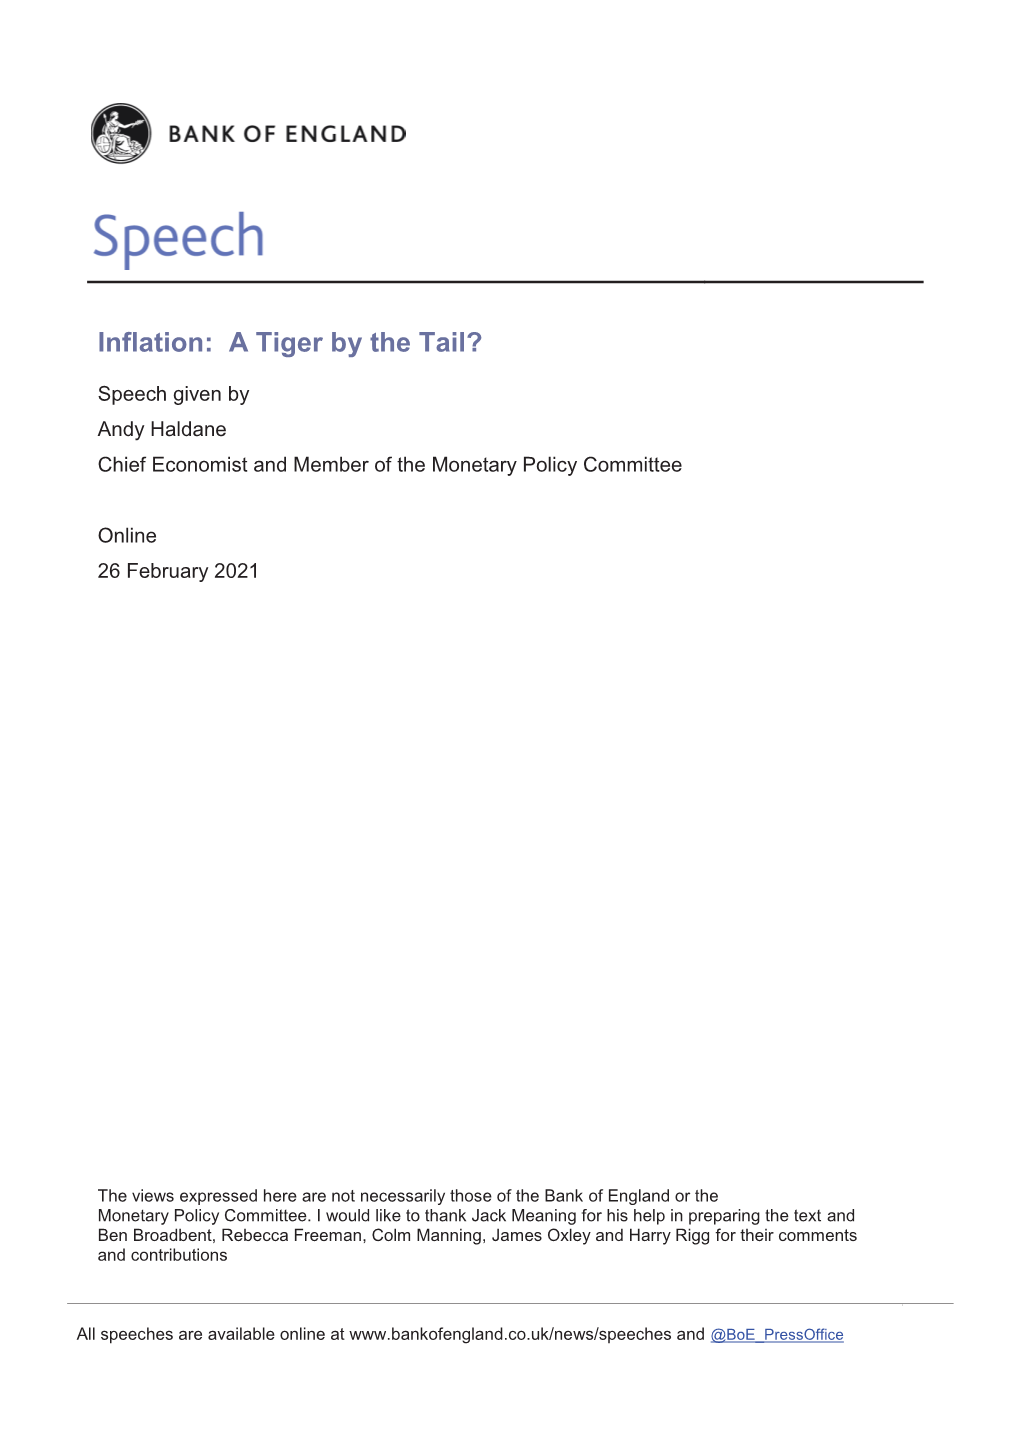 Pre-Recorded Speech Given in House by Andy Haldane on Friday 26